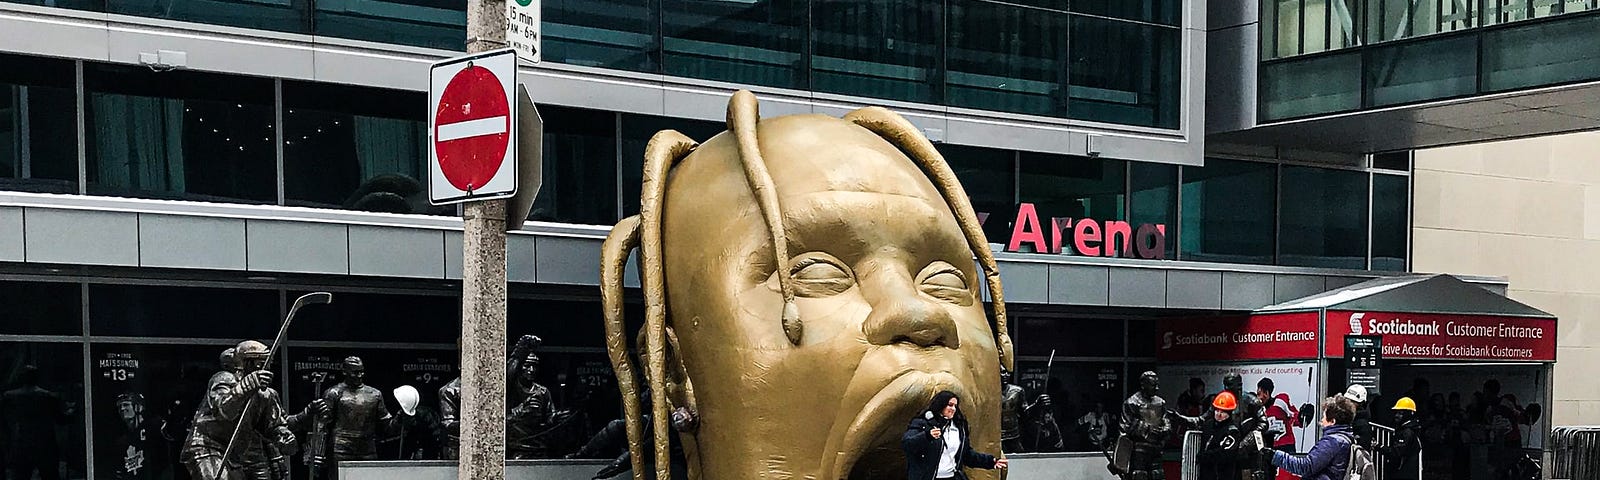 Travis scott tragedy who you won’t be hearing from, astroworld, music festival, live Nation, fatalities, mob, crowd surge, rush the stage, injuries, travis scott mouth, travis scott face, casey lane, caseylanewords, news, newsfeed, medium, medium article